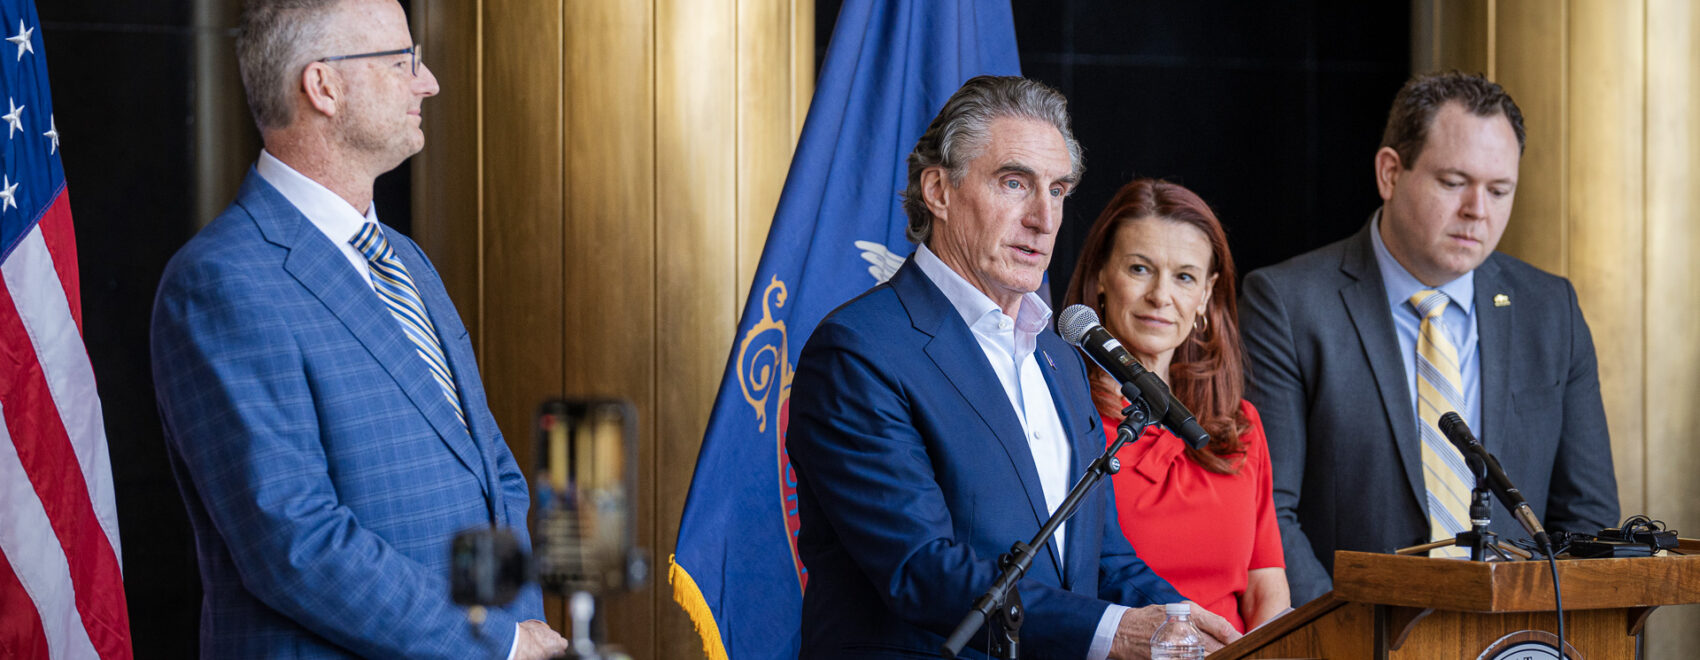 Gov. Doug Burgum was joined by the directors of 11 state agencies today to kick off Financial Literacy Month in North Dakota and share the new resource available to all North Dakotans, Smart with My Money.nd.gov.